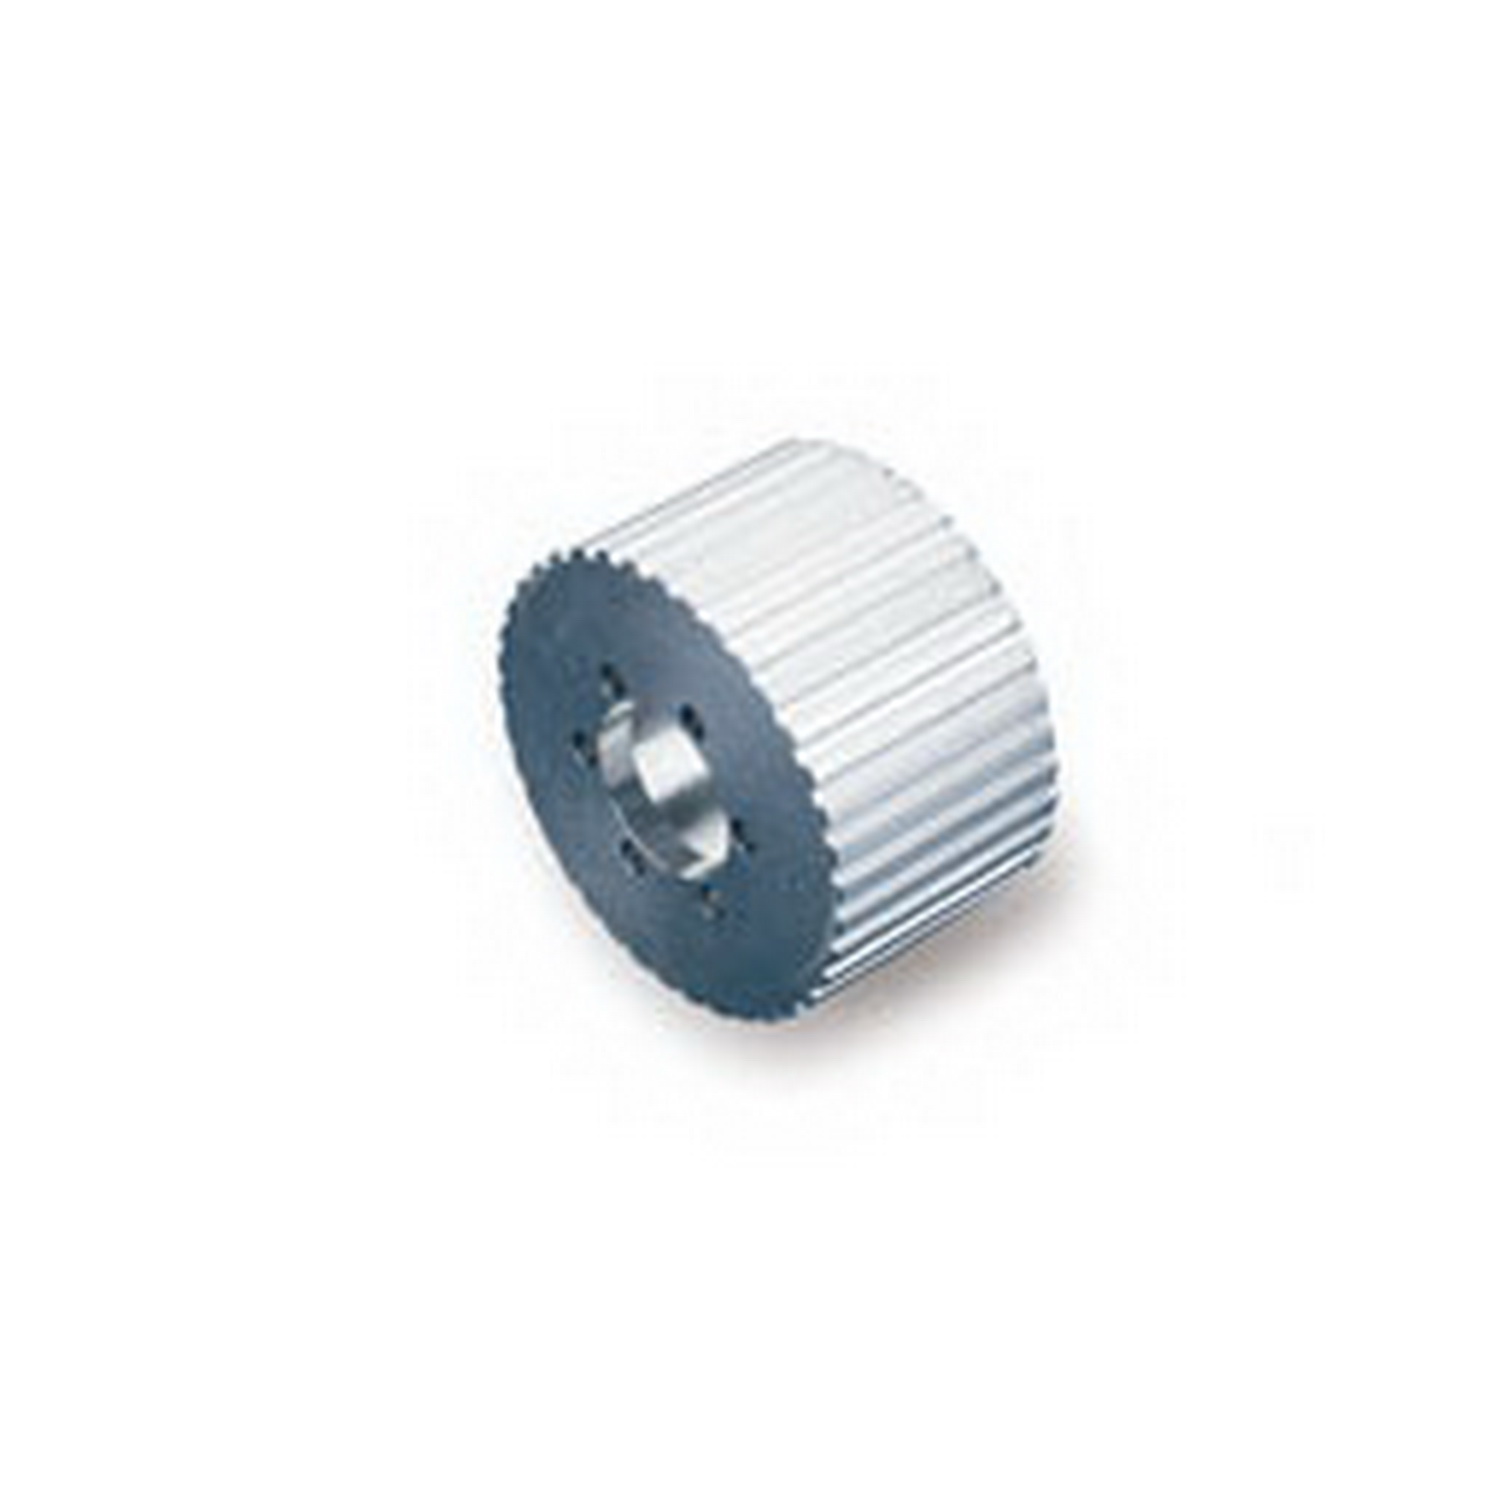 Weiand Weiand 7029-33 0.5 in. Pitch Drive Pulley